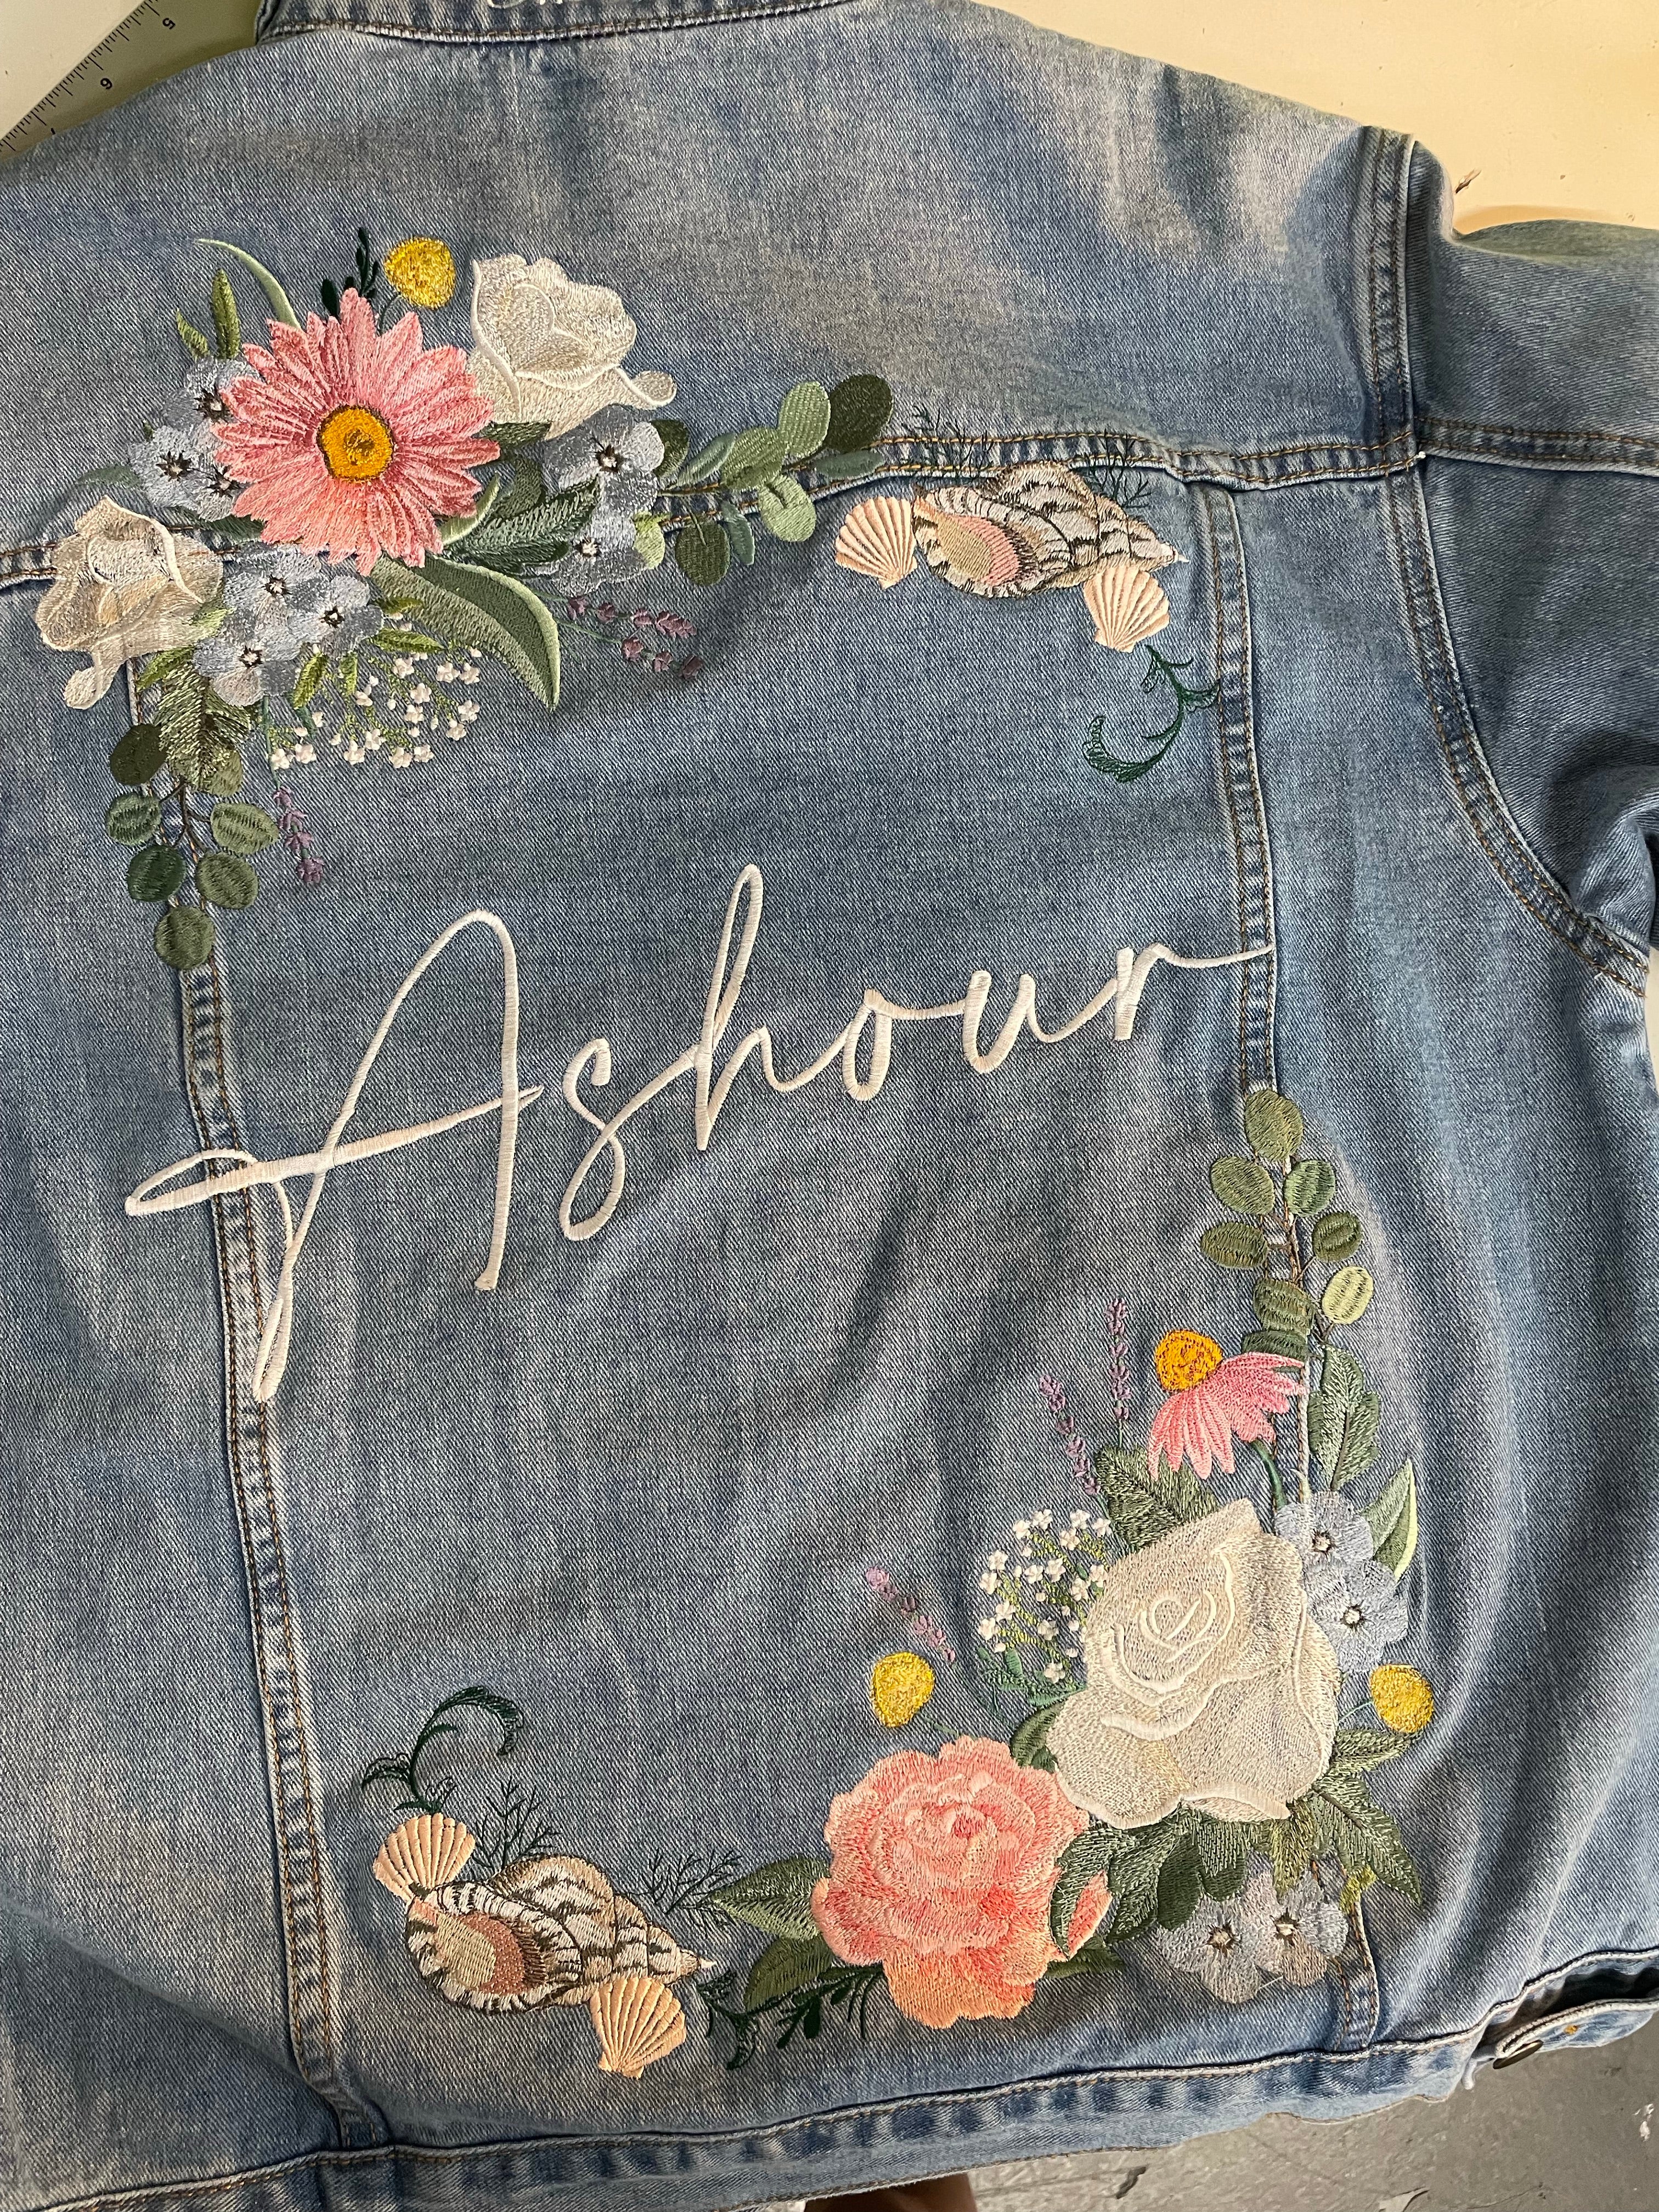 Floral Denim Jacket - Made by Many Hands